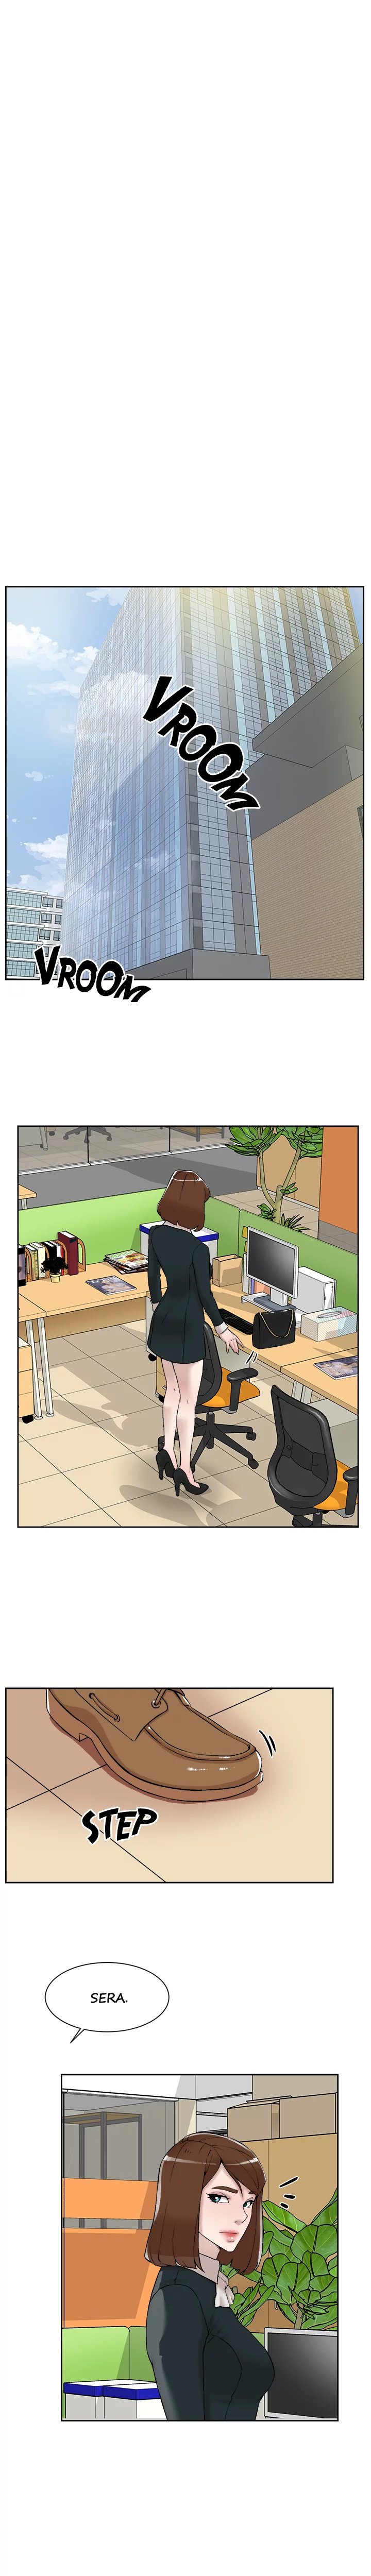 office-affairs-chap-118-12